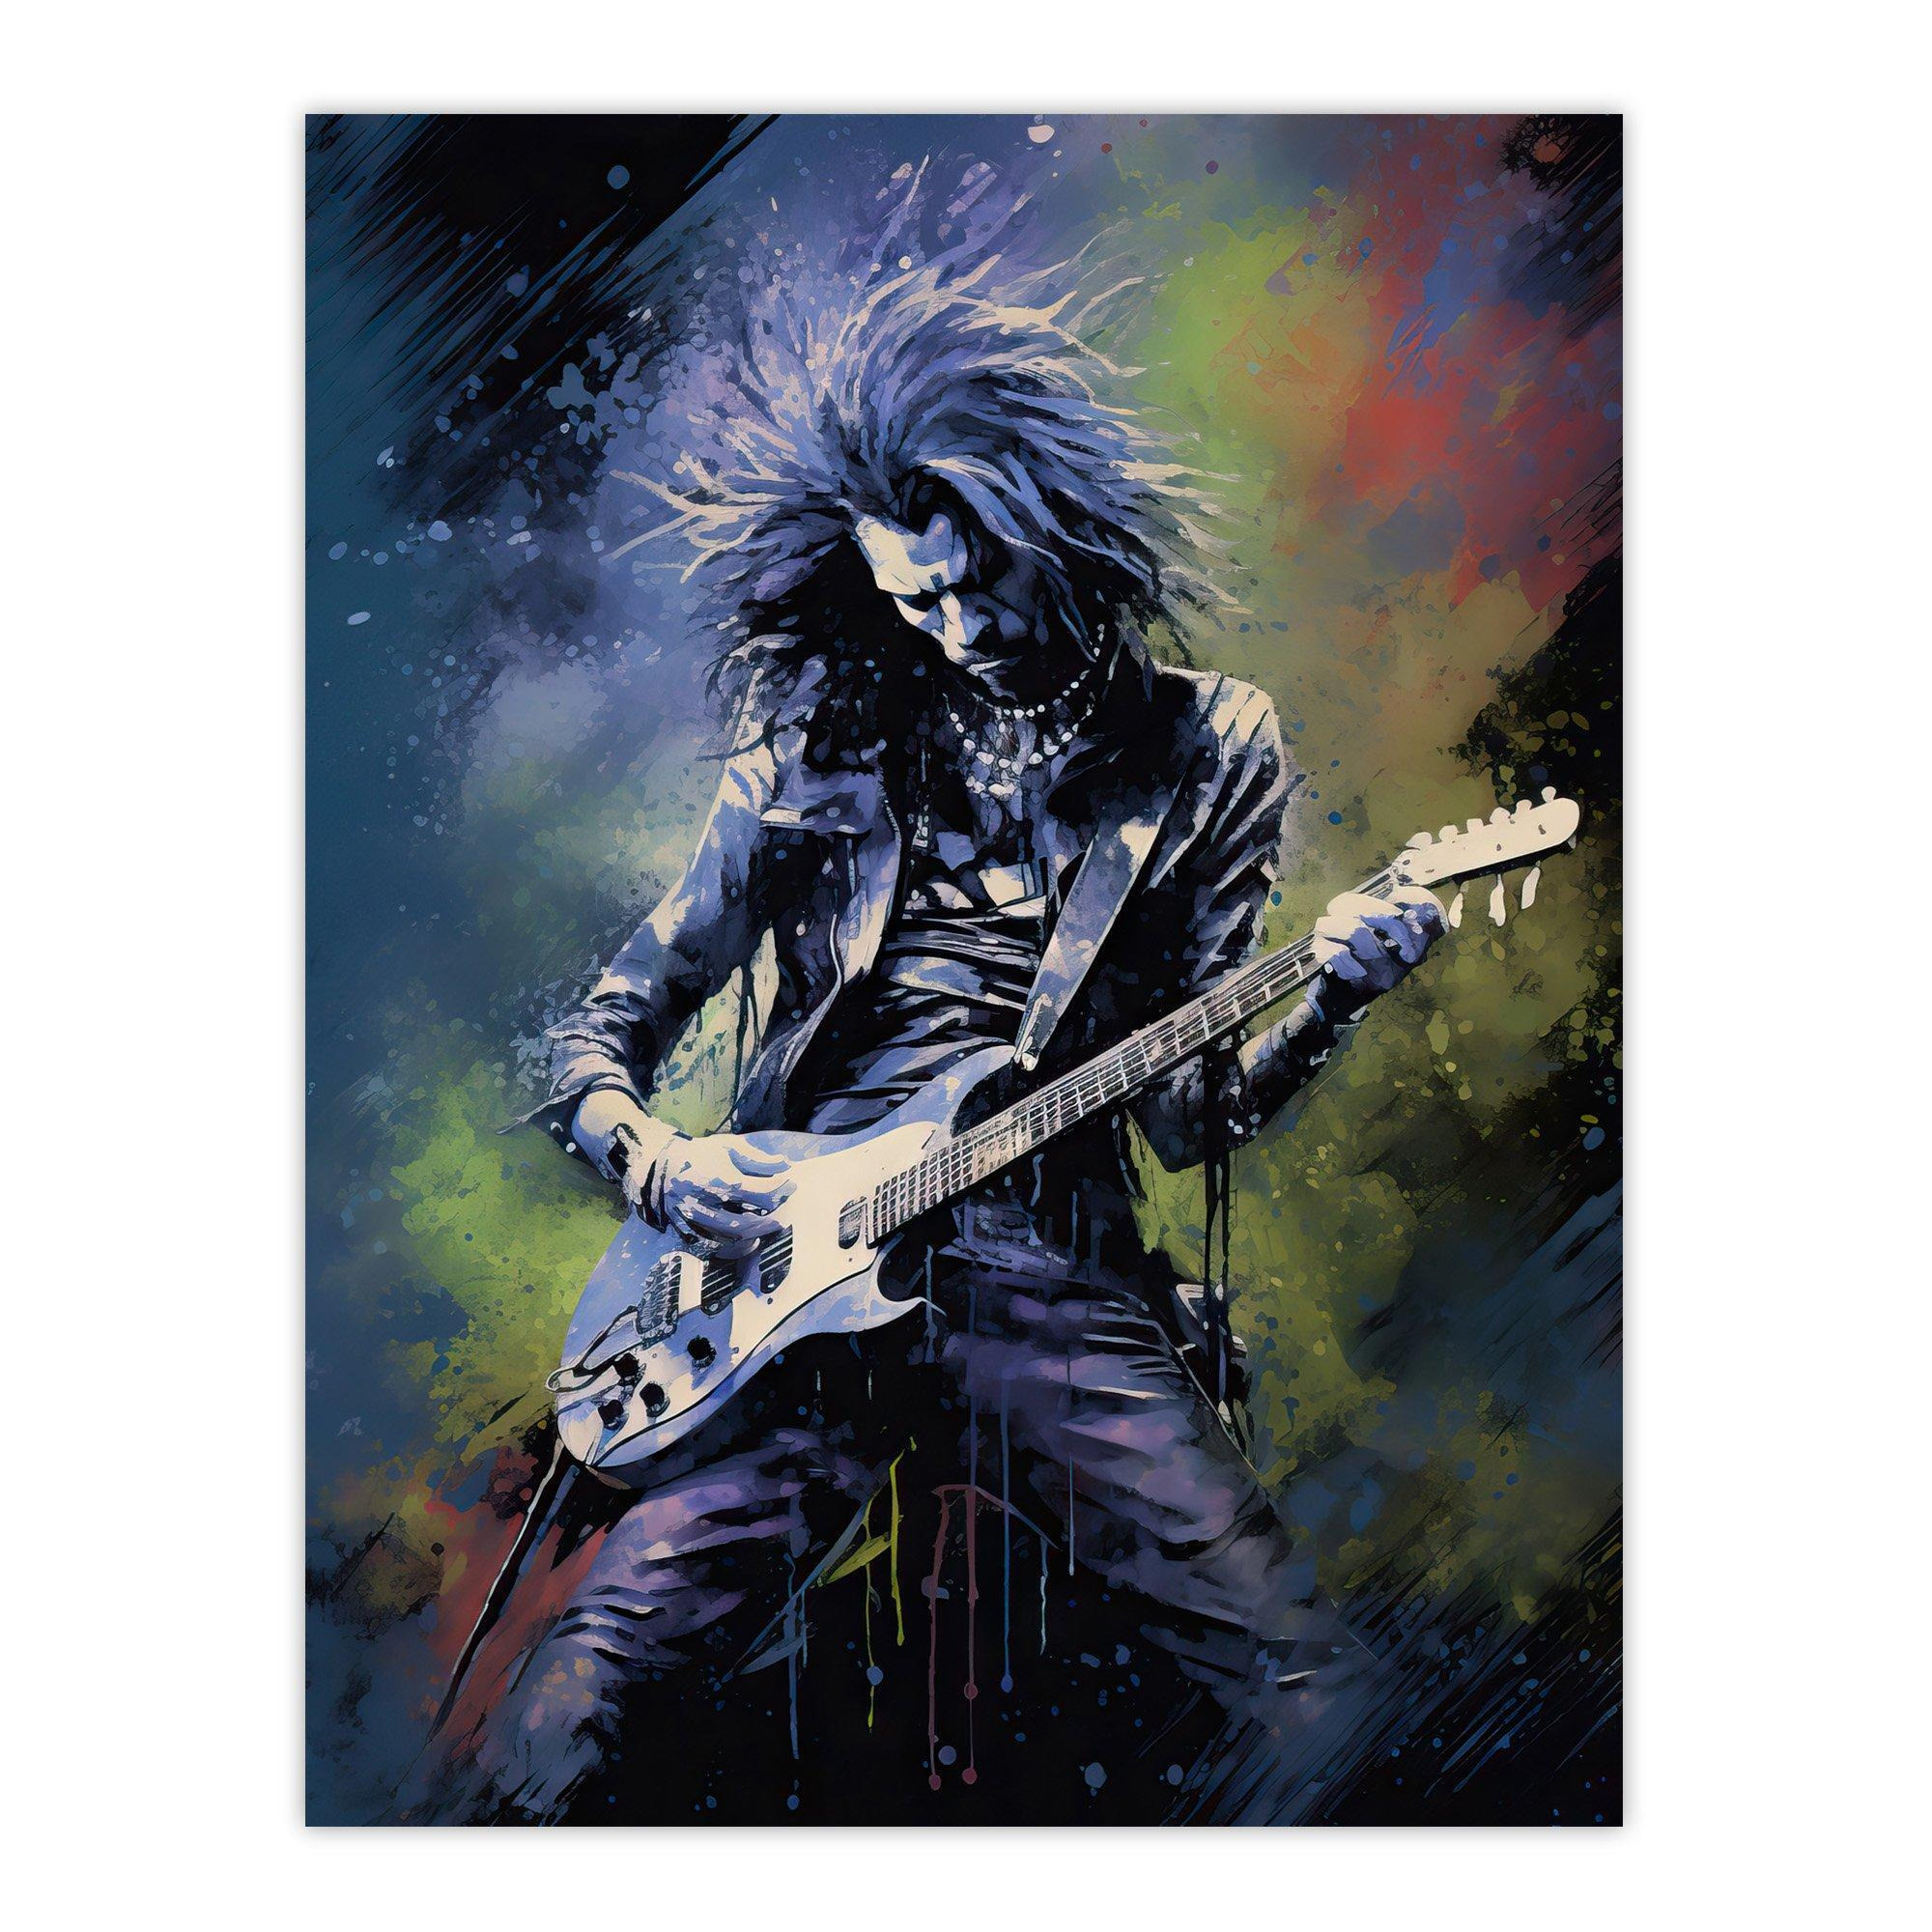 Gothic Metal Guitar Virtuoso Colourful Artwork Musician Playing Music Solo Unframed Wall Art Print Poster Home Decor Premium - image 1